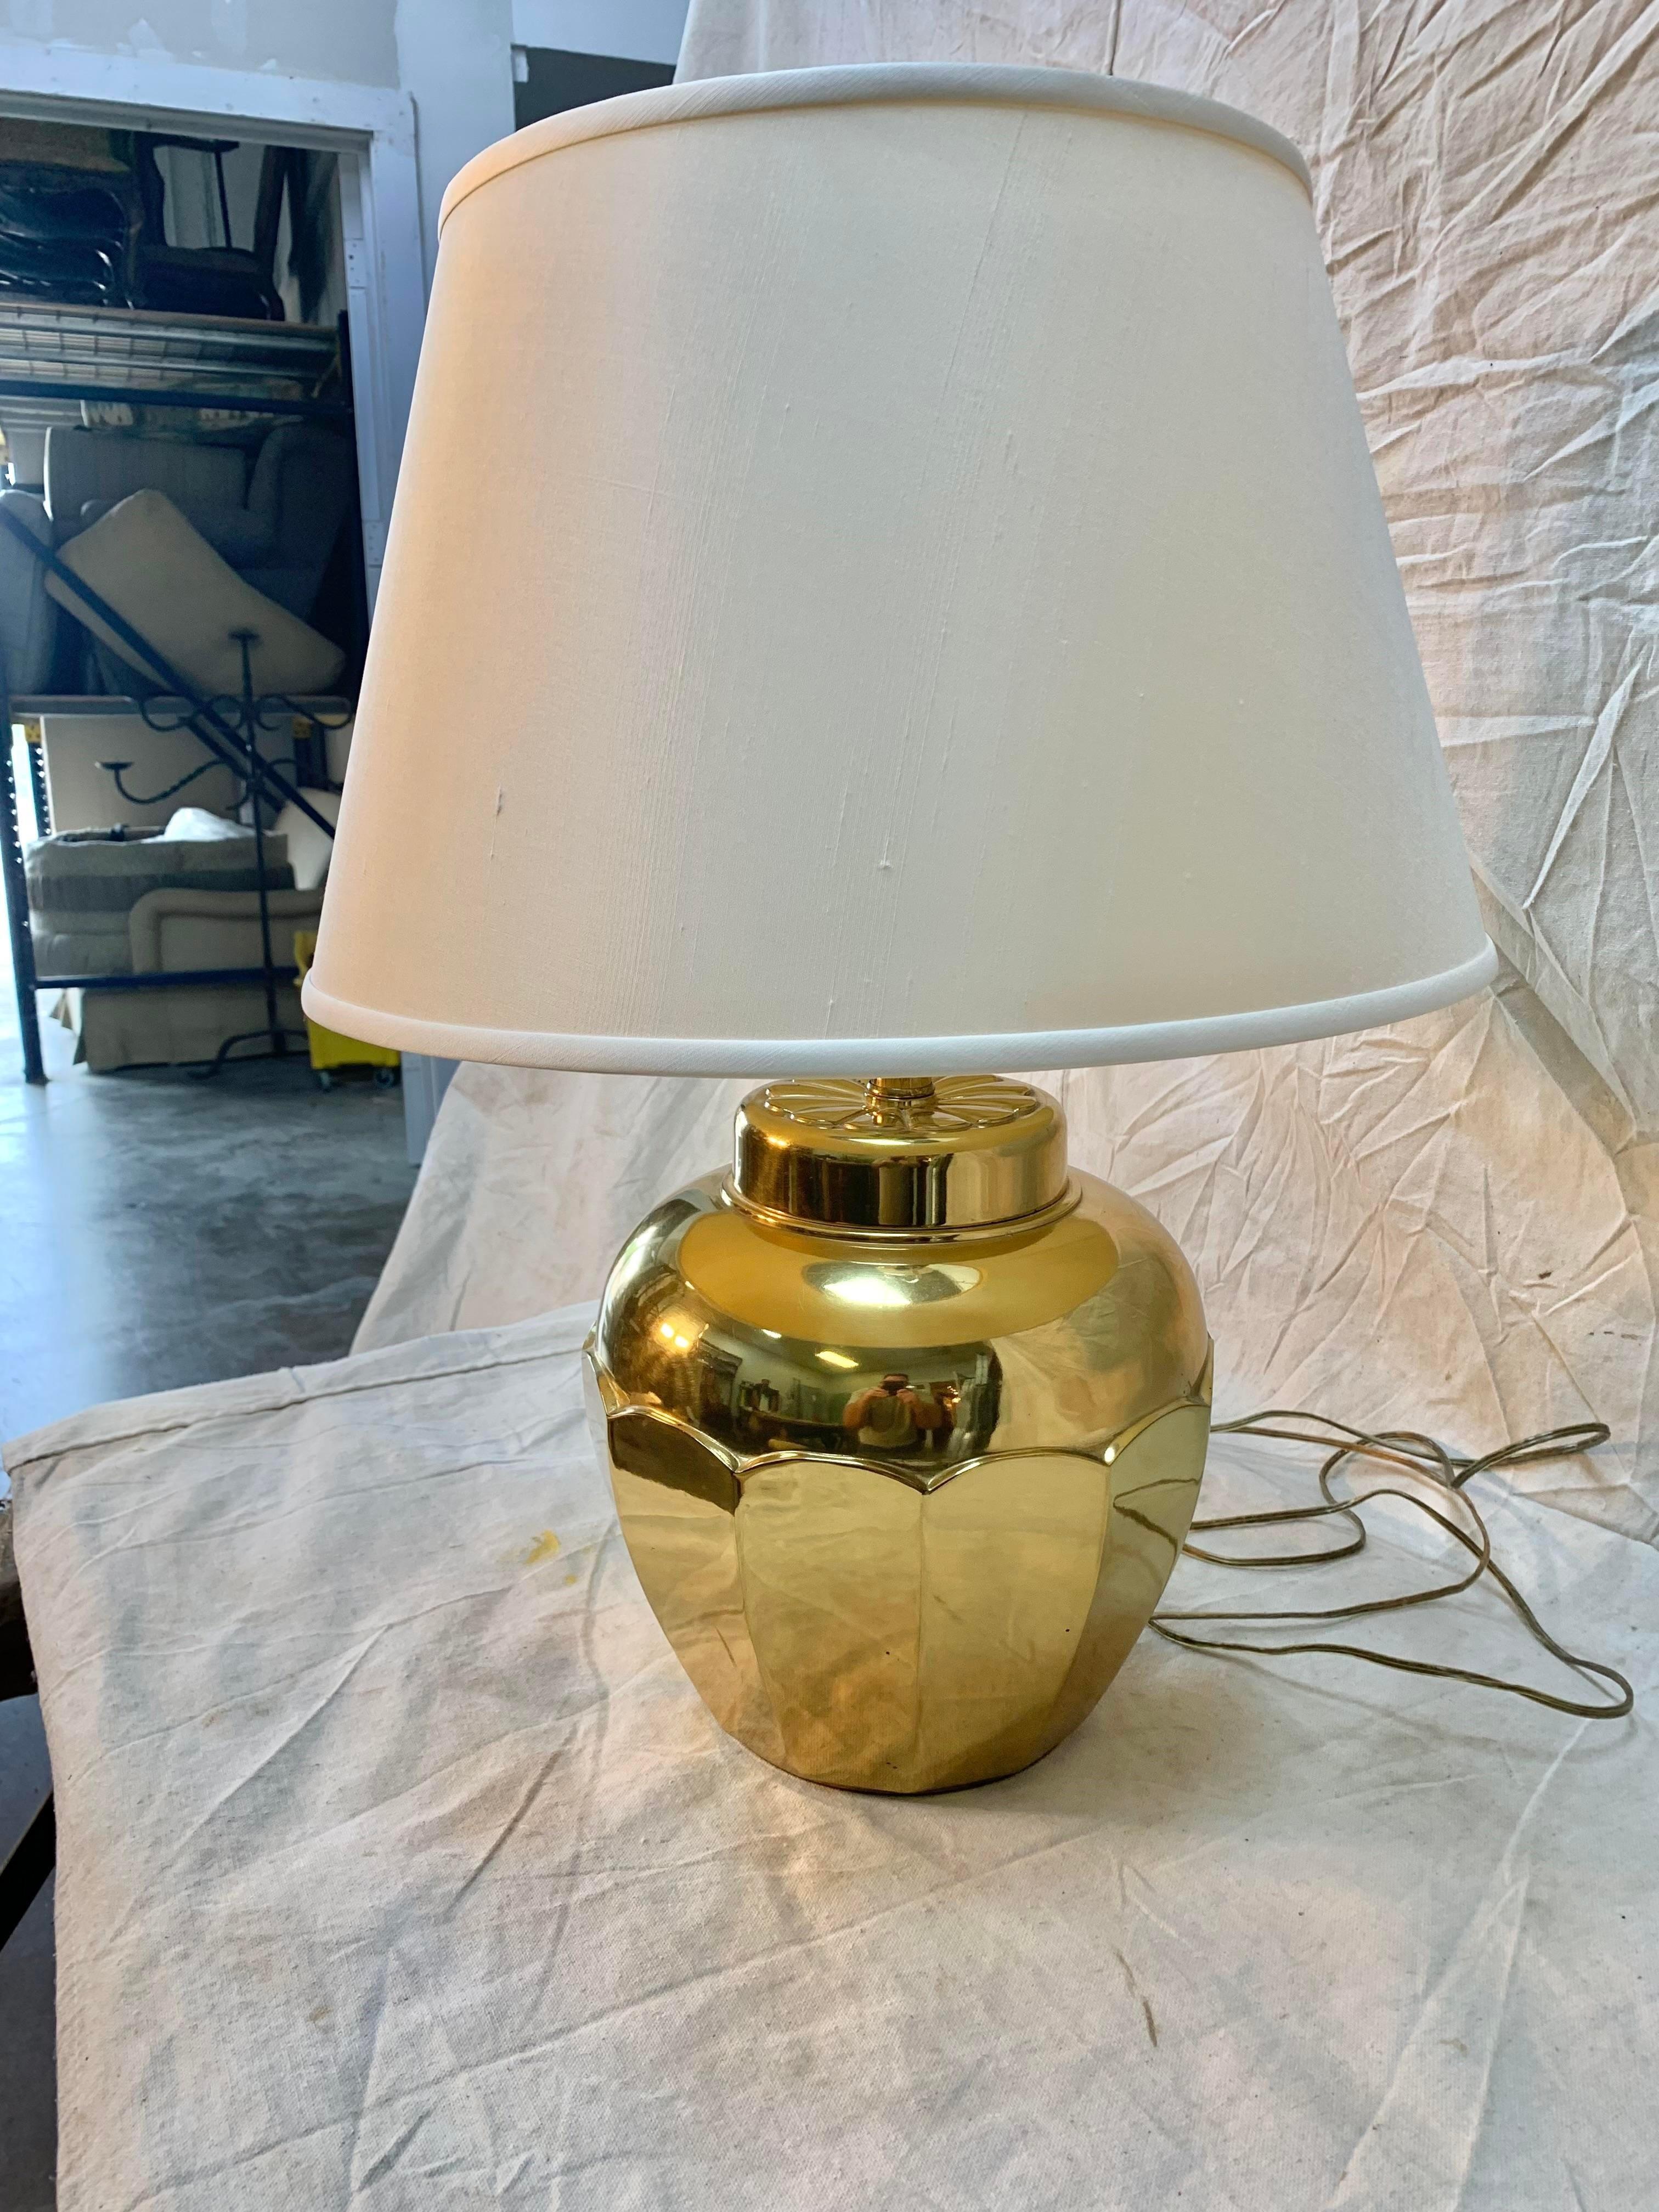 This vintage Late 20th century Brass Table Lamp features a polished brass body. Constructed in a scalloped orb shape with an intricate design on the top. The unique design of this piece will mix well with any decor.

Available with our without the